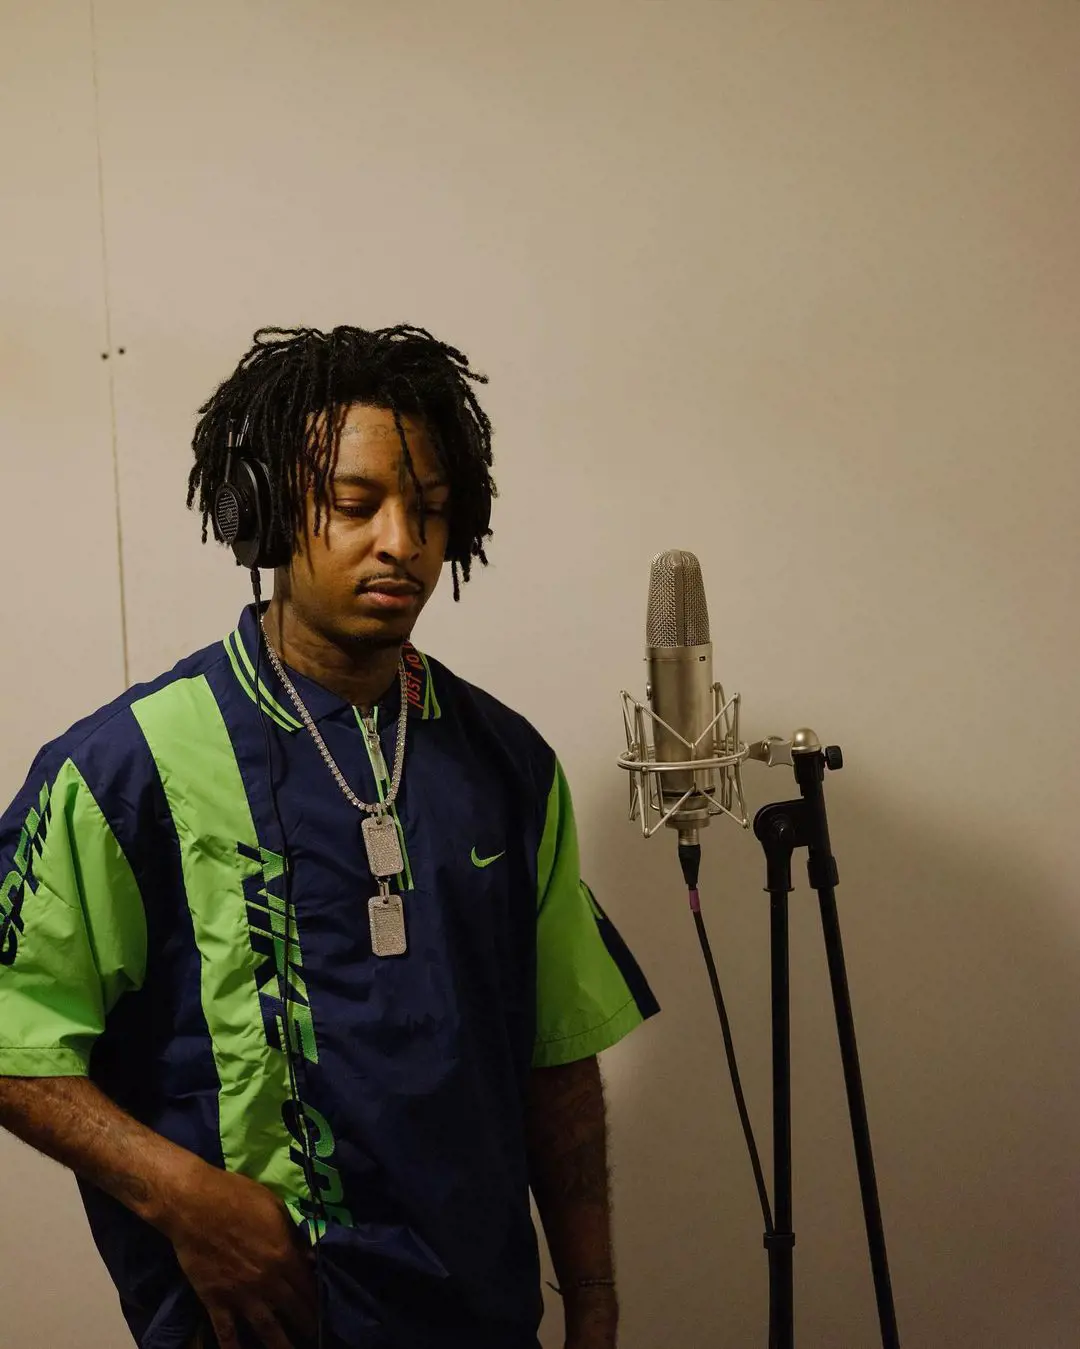 Rapper 21 Savage recording a song in Miami Florida where he is seen wearing a green t-shirt and dreadlocked hair. 